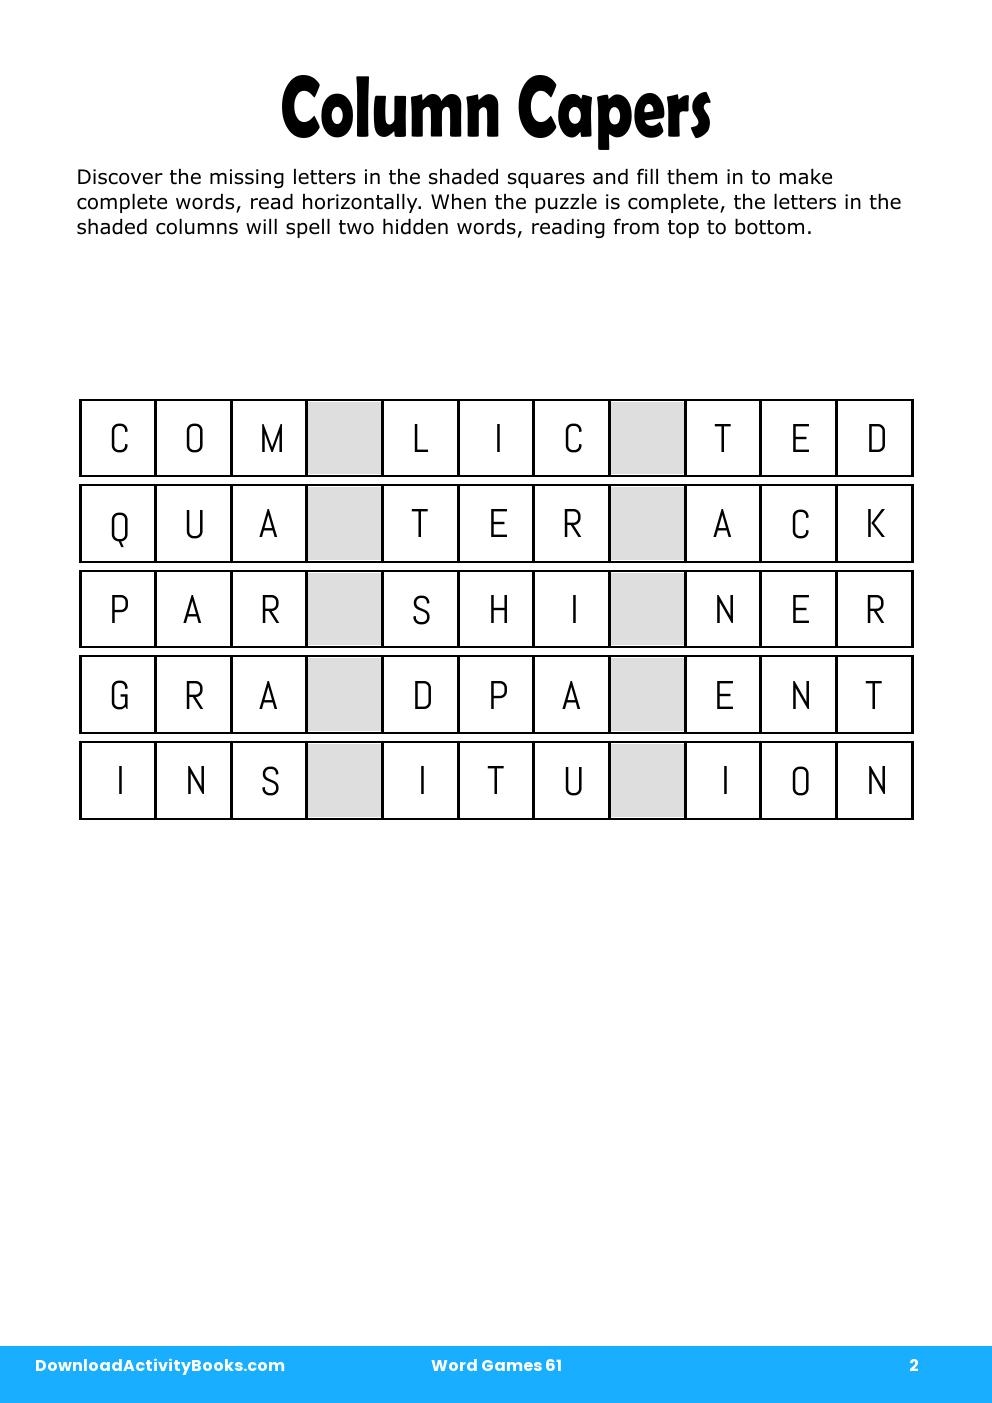 Column Capers in Word Games 61